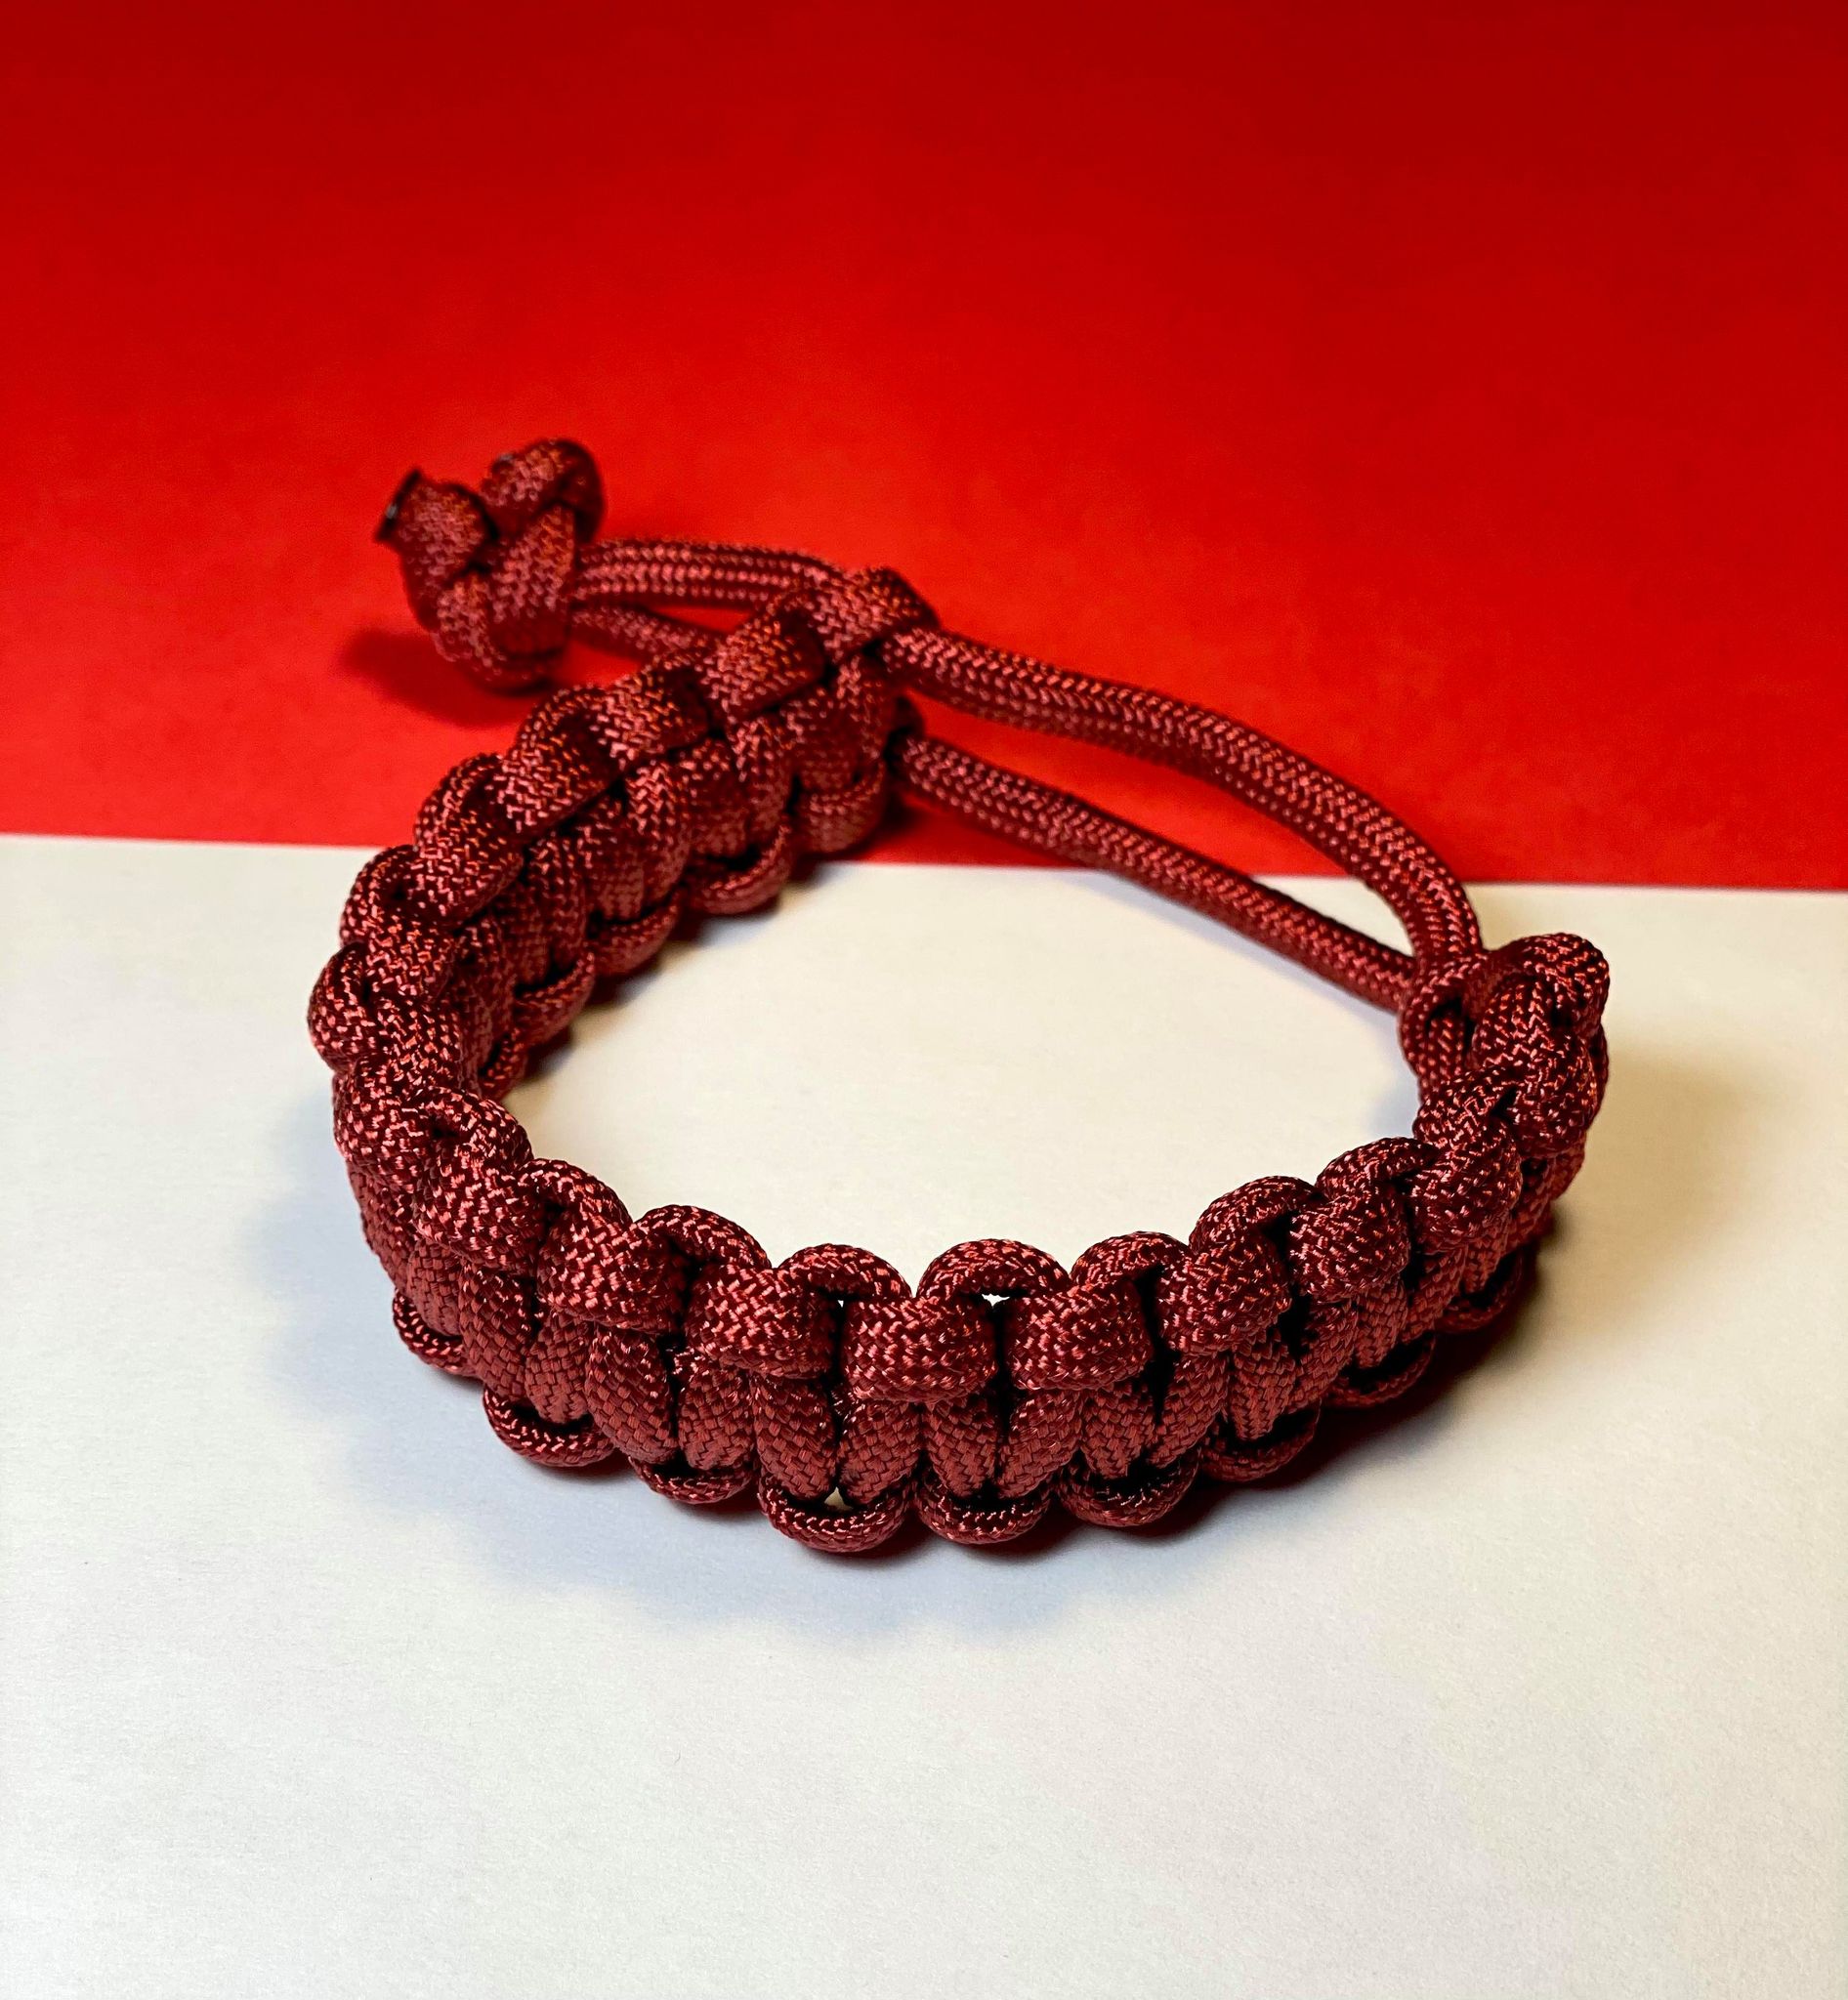 Paracord – Quherencia